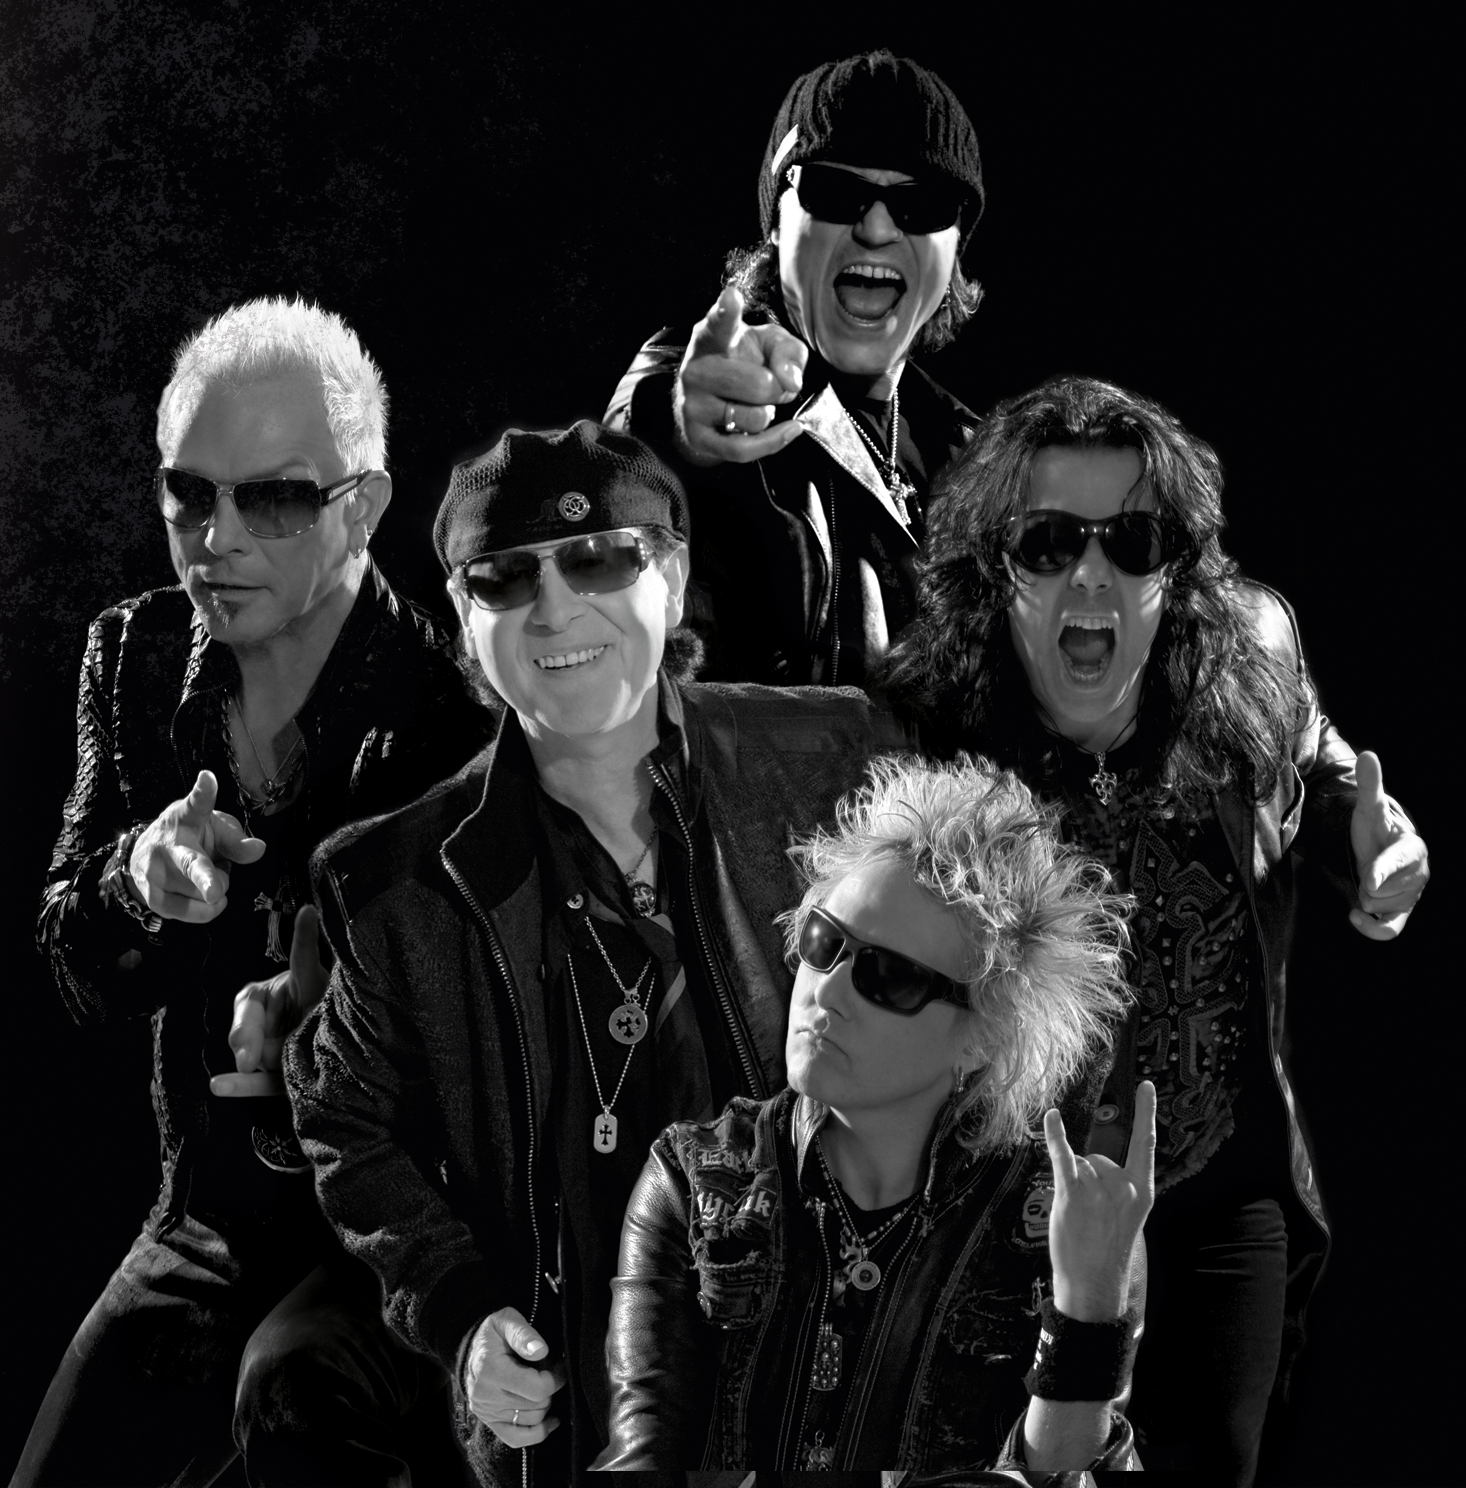 Music Scorpions 2560x1600px 100 Quality HD Backgrounds